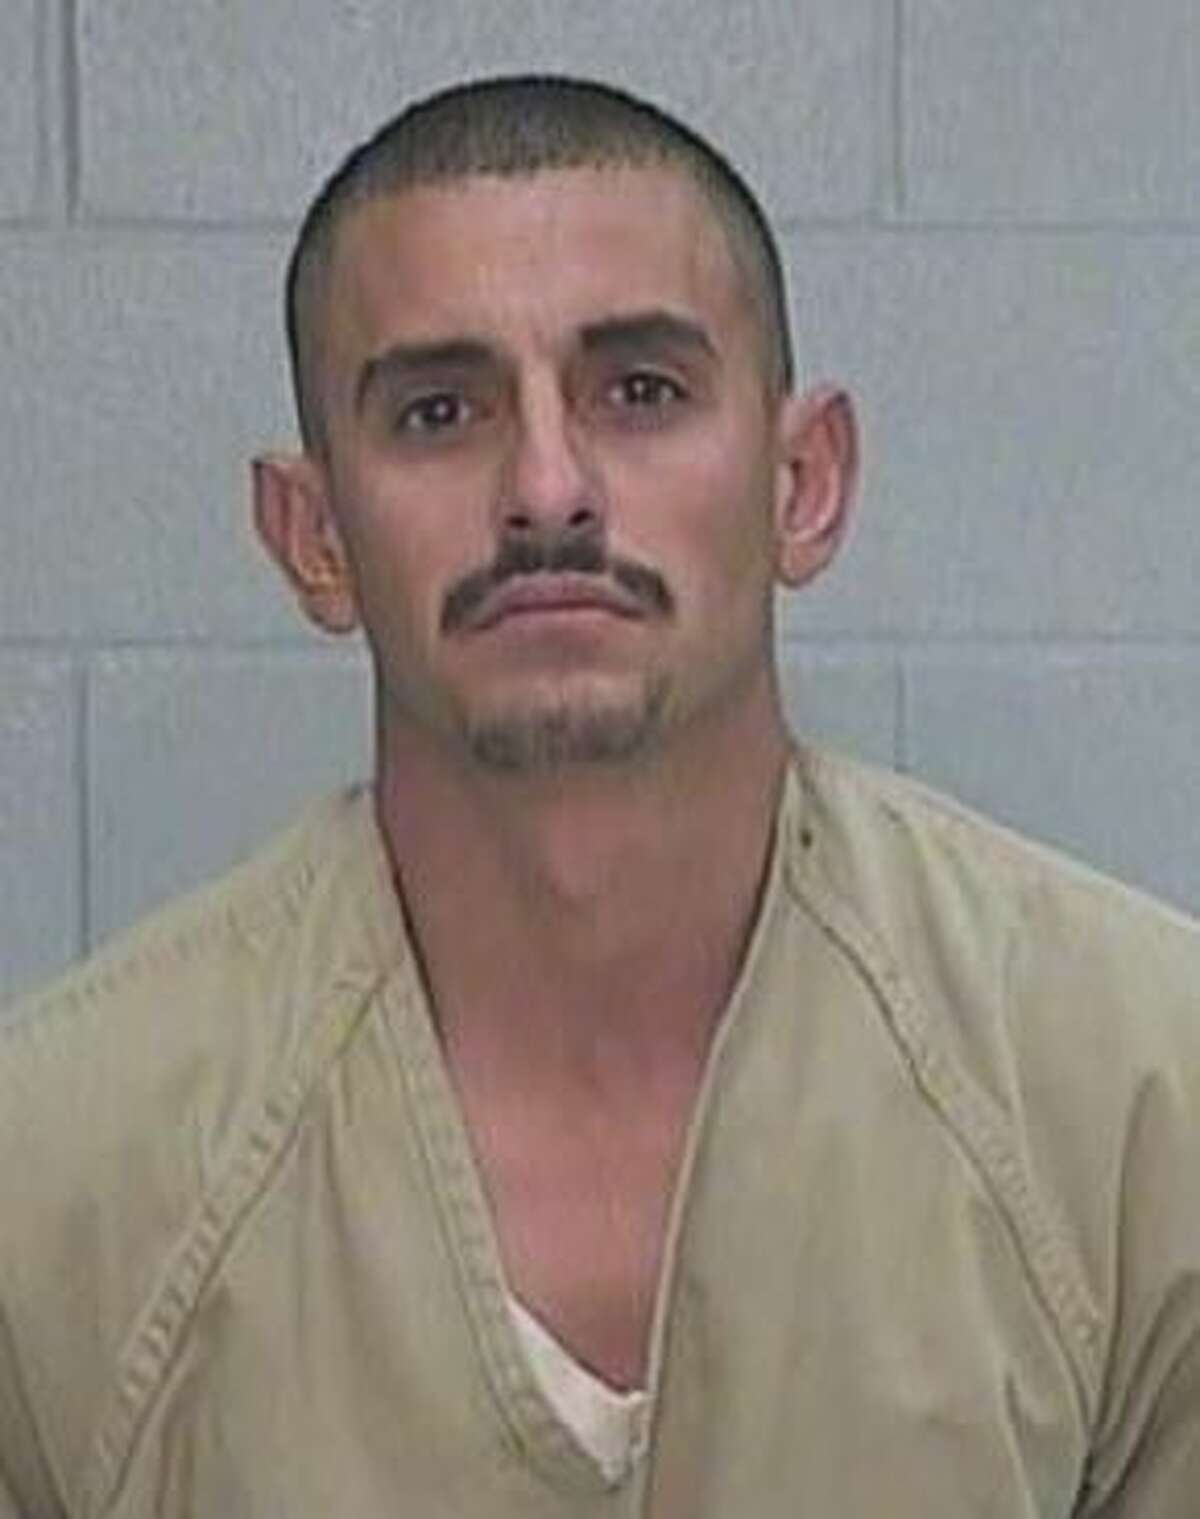 Luis Carlos Medrano-Ortiz, 33, faces a first-degree felony charge of aggravated kidnapping.